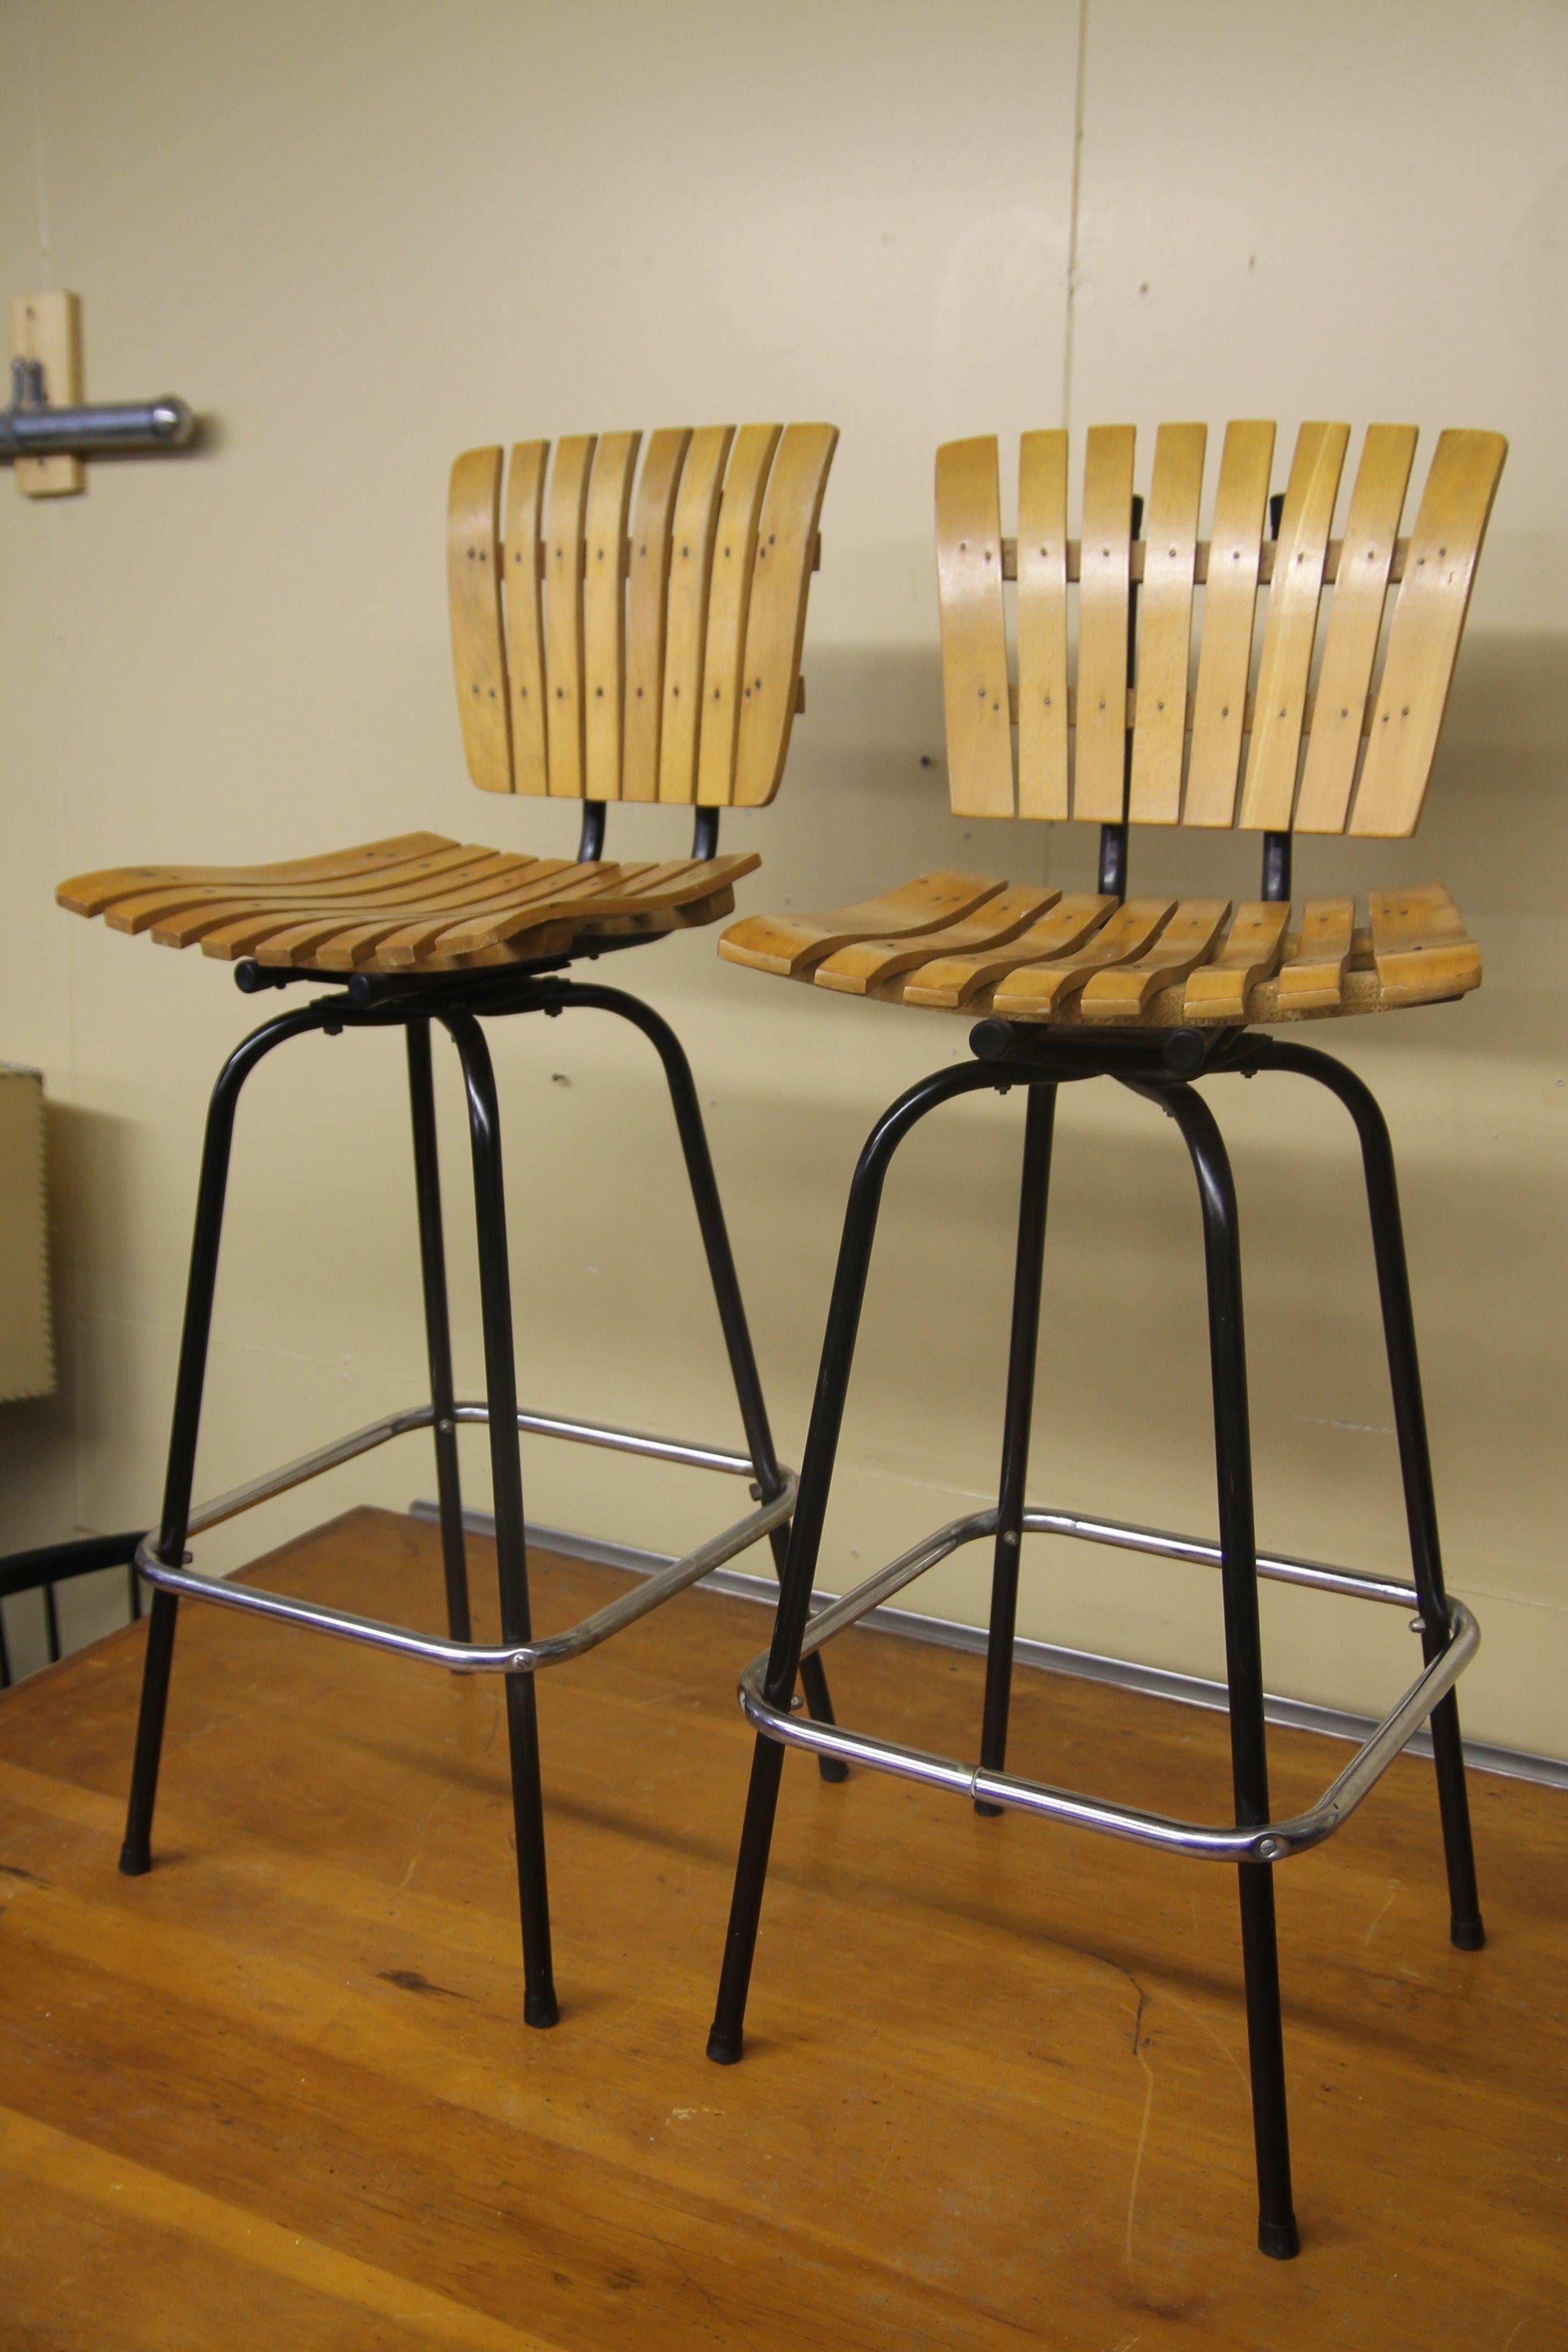 Stools in the Manner of Arthur Umanoff In Good Condition For Sale In Asbury Park, NJ